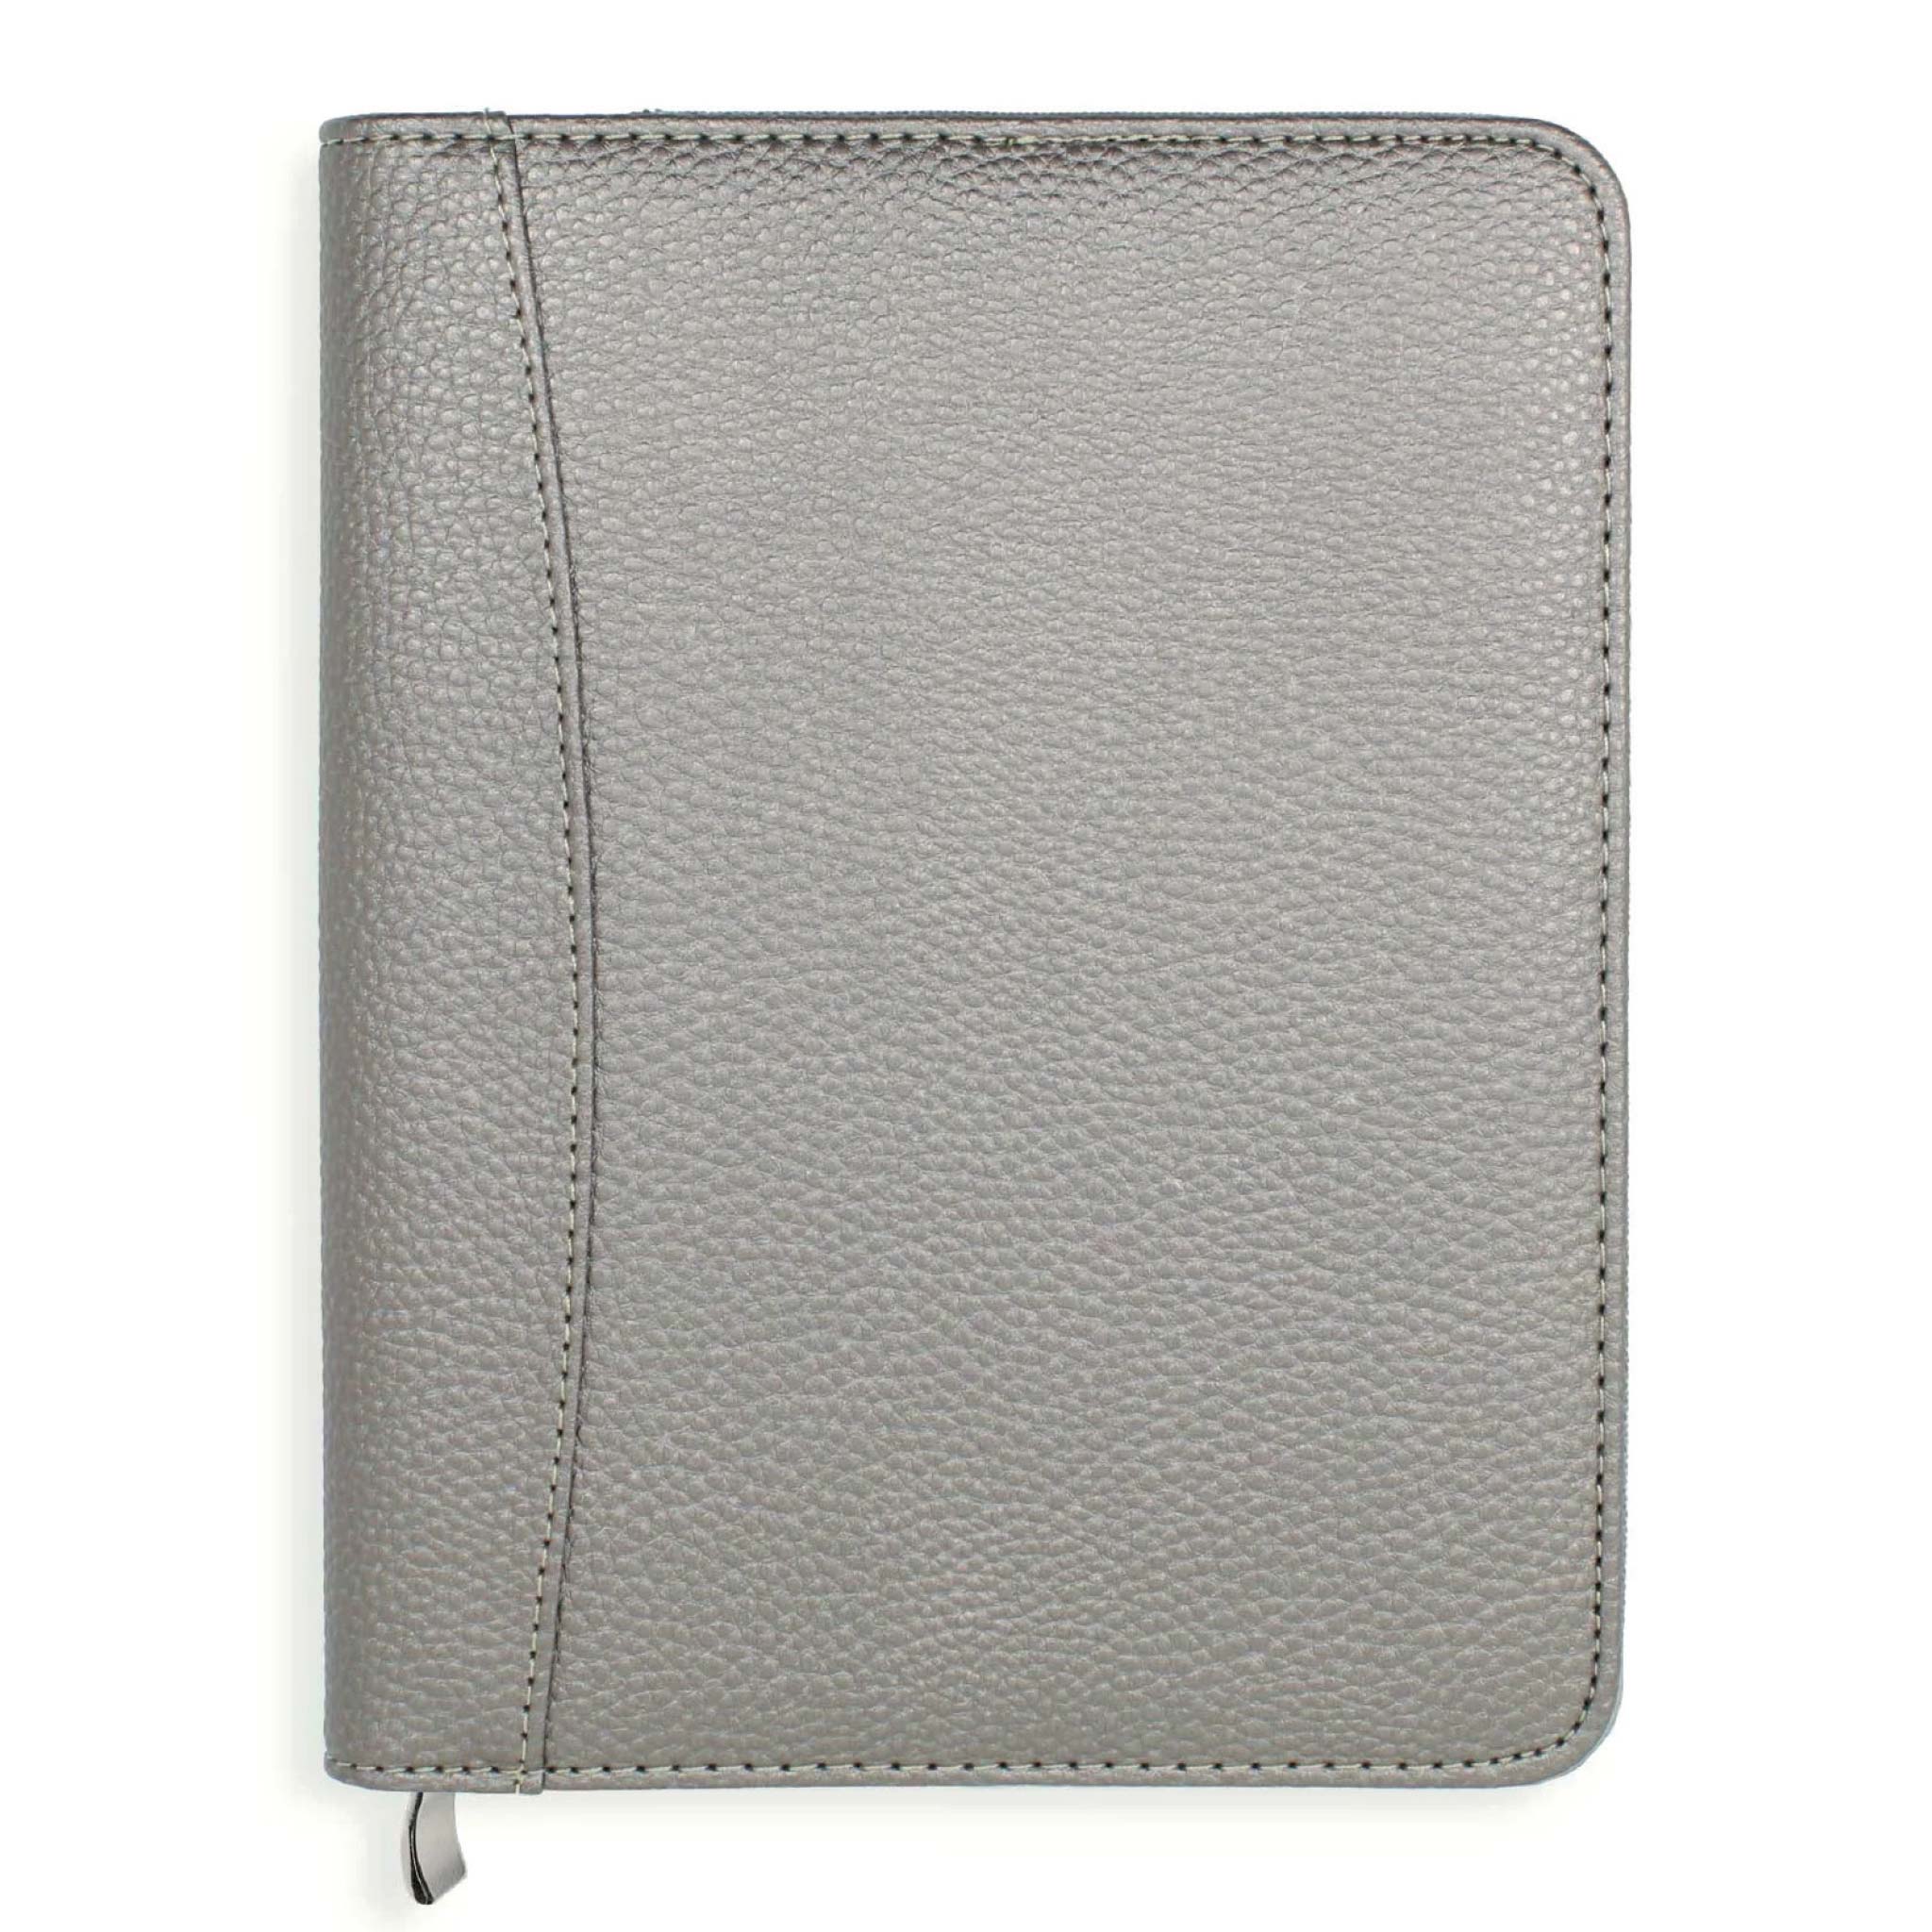 An image of Luxury Everyday Diary Cover | Full-Zip Cover with Internal Pocket Smoke